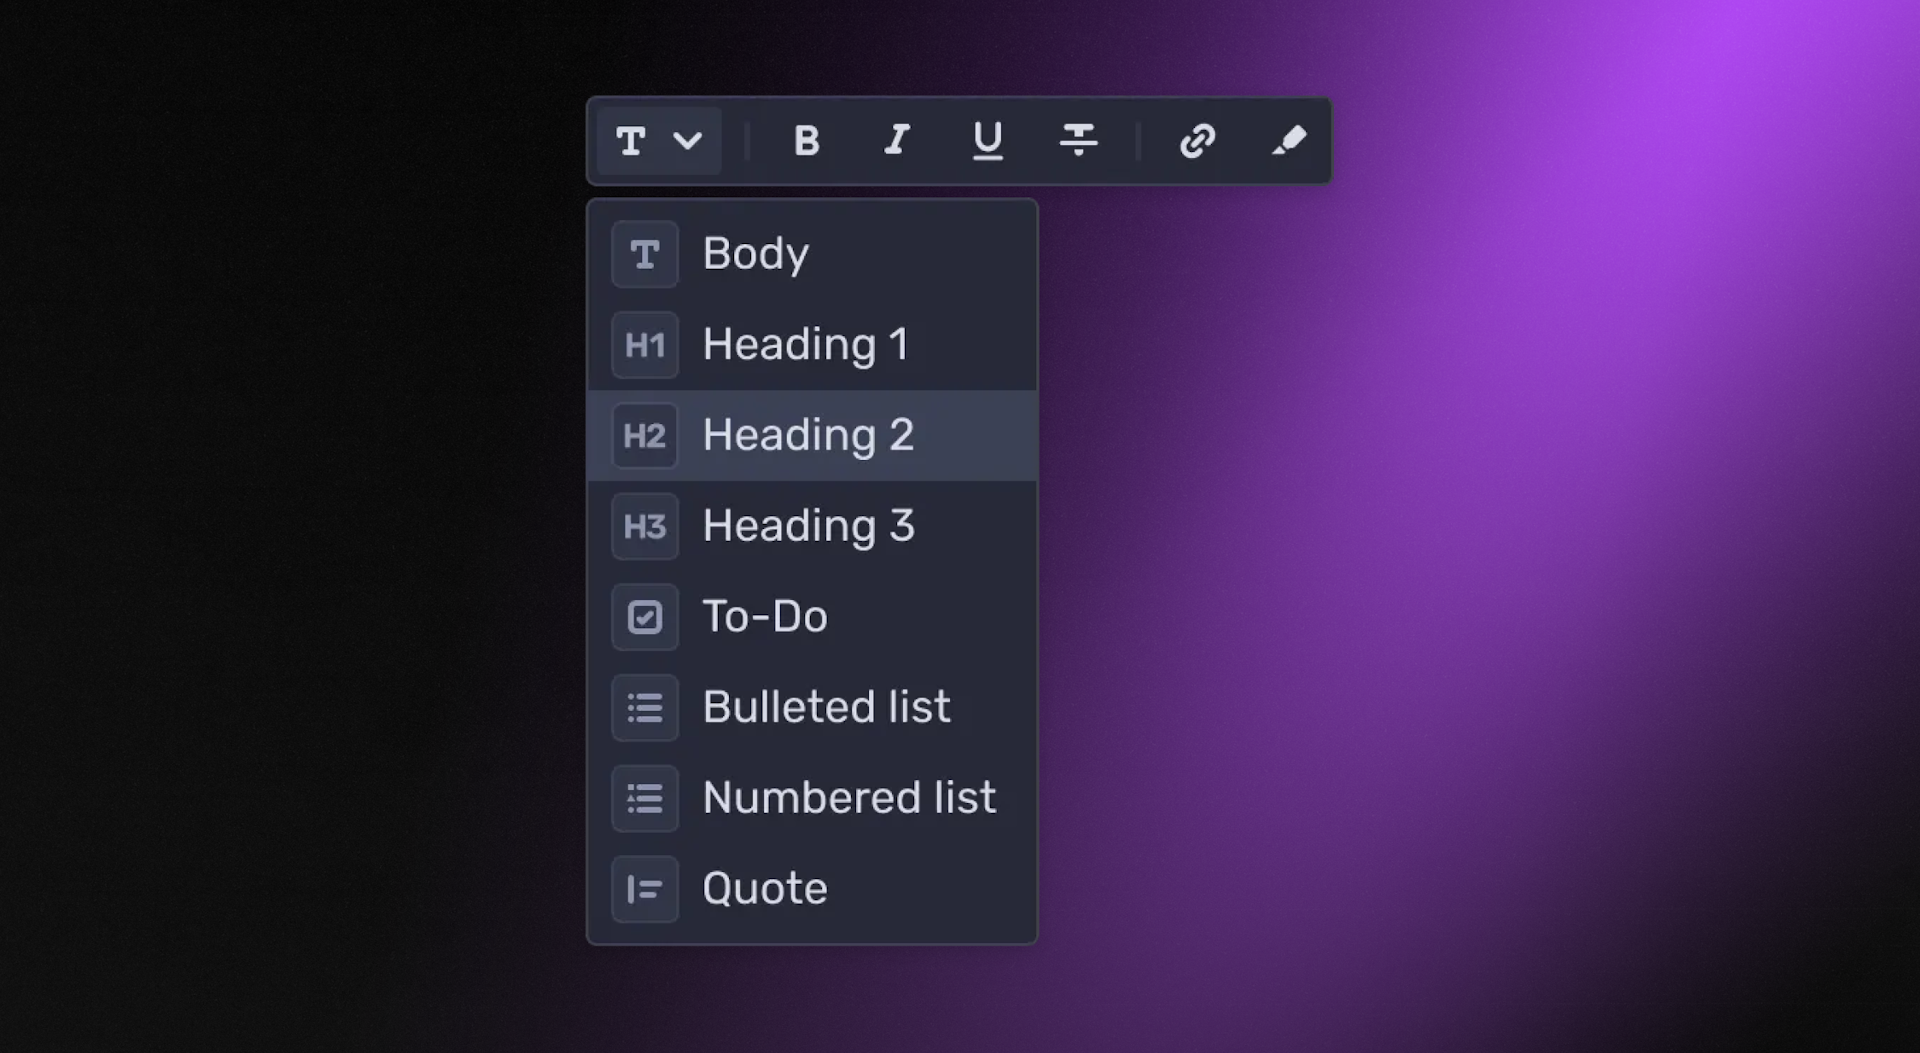 Bubble menu allows you to apply updates to text and change elements to other types.